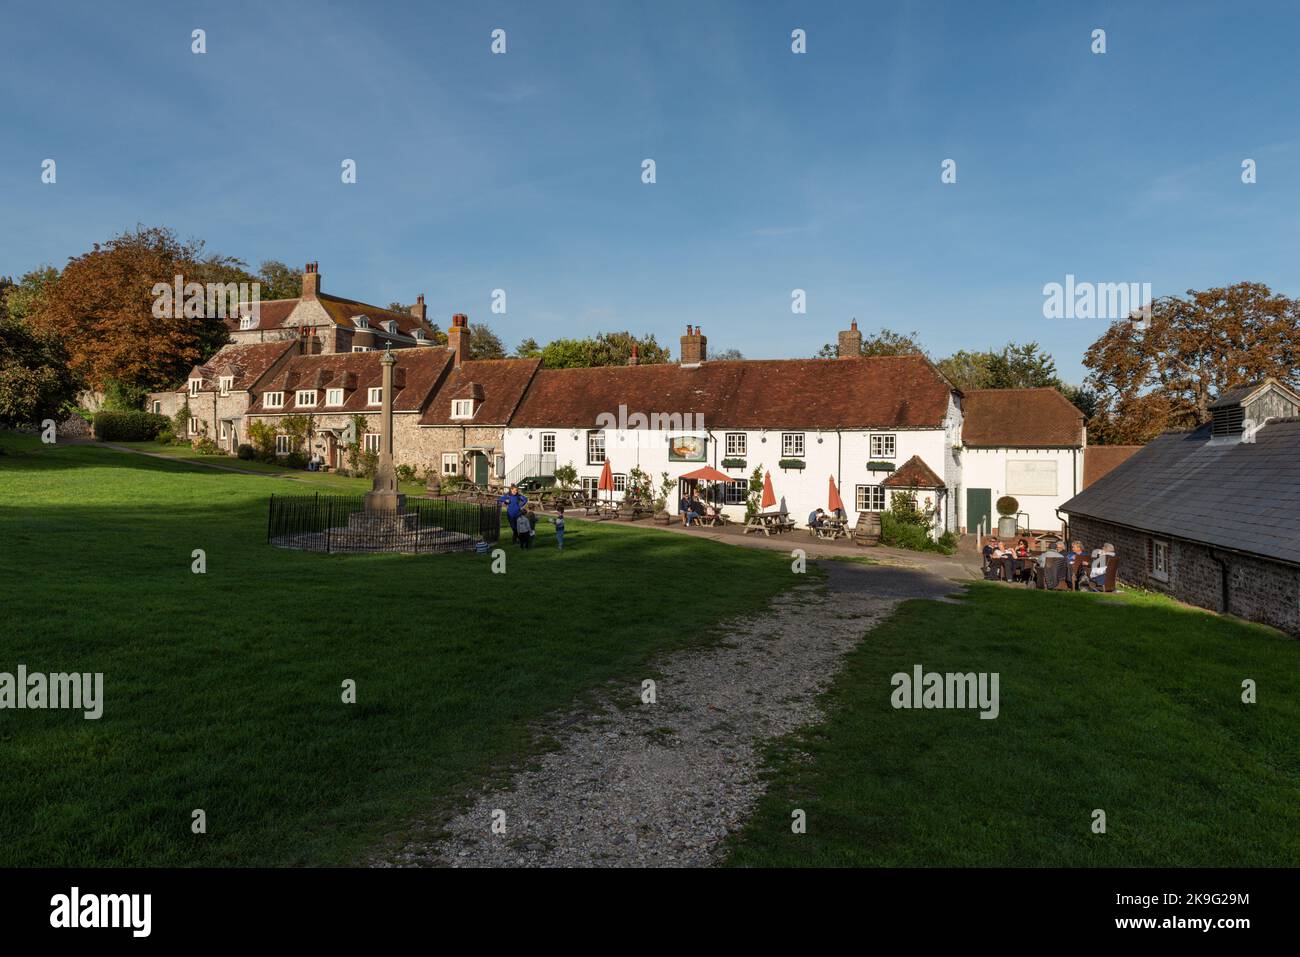 The Village Green at East Dean near Eastbourne, in East Sussex, England, UK, showing the Tiger Inn Public House in late afternoon autumn sunlight. Stock Photo